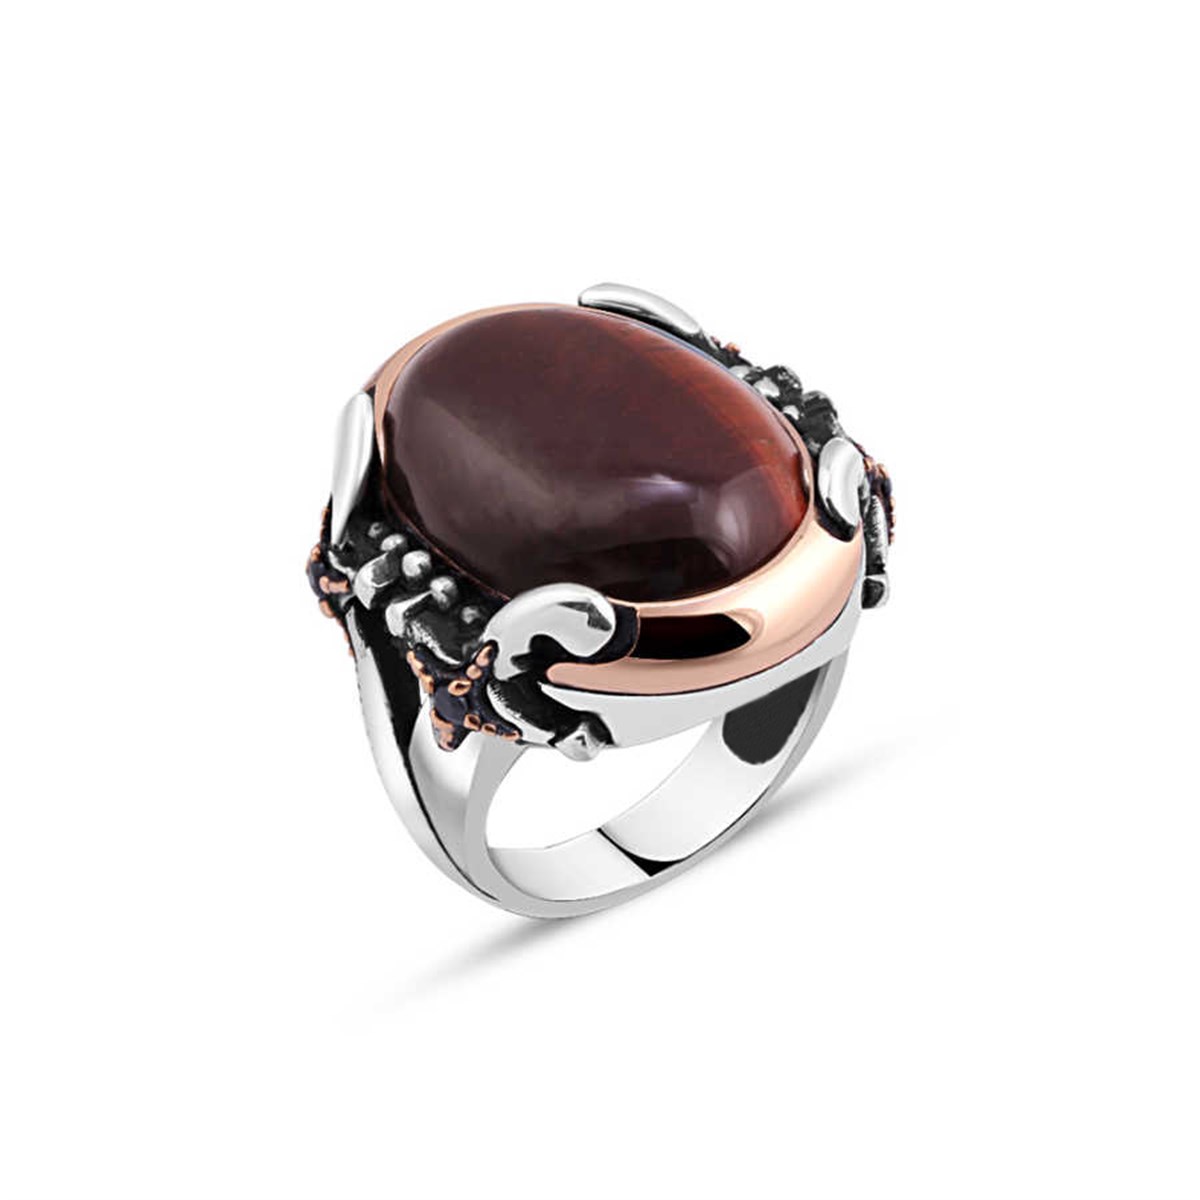 Sterling Silver Men's Ring with Tiger's Eye Stone and Sword